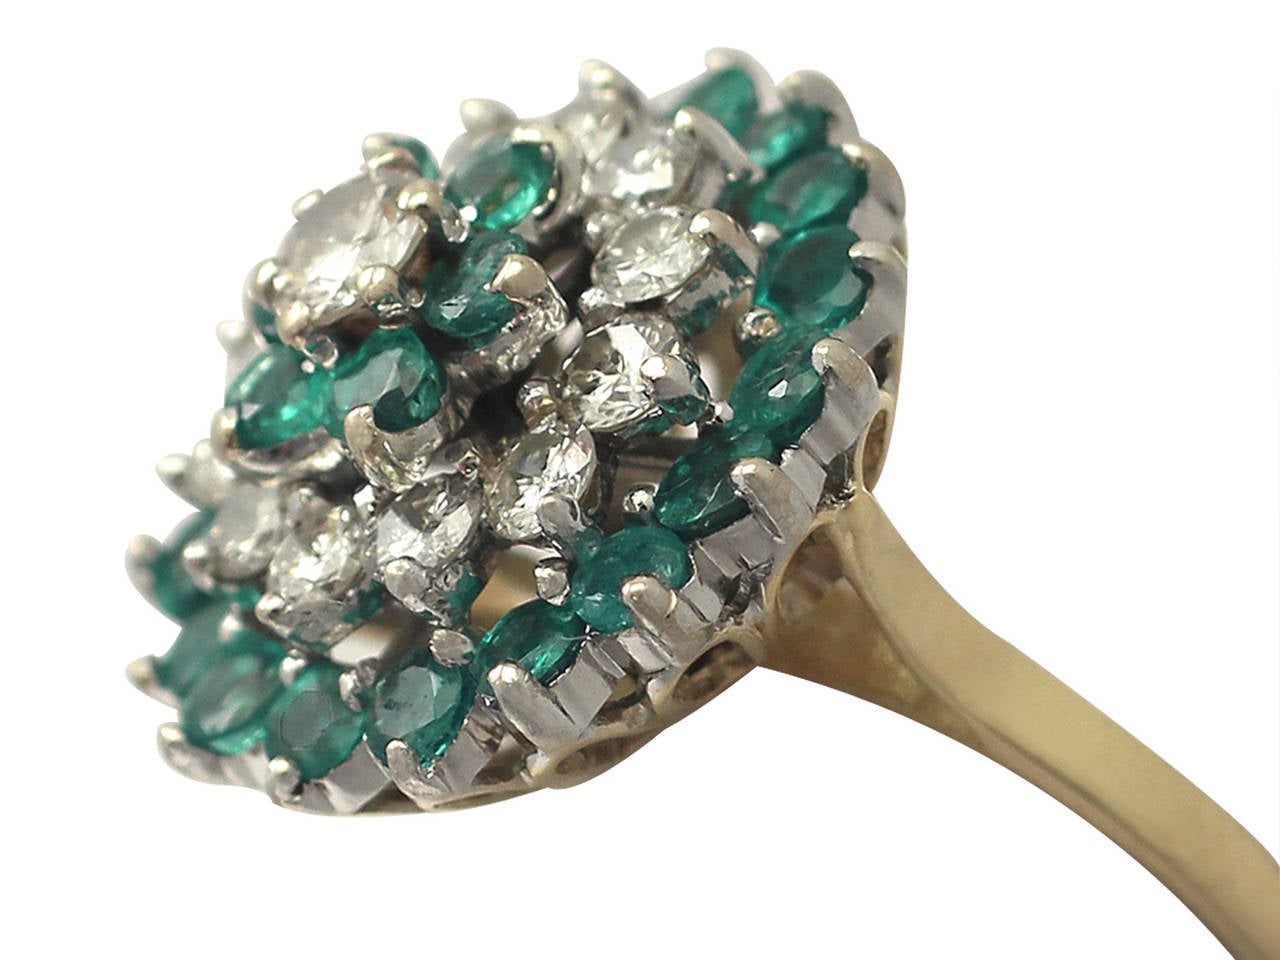 A fine and impressive vintage cocktail ring embellished with 1.86 carats diamonds and 1.70 carats natural emeralds set in 18 karat white and yellow gold; part of our vintage jewelry and estate jewelry collections

This fine vintage cocktail ring